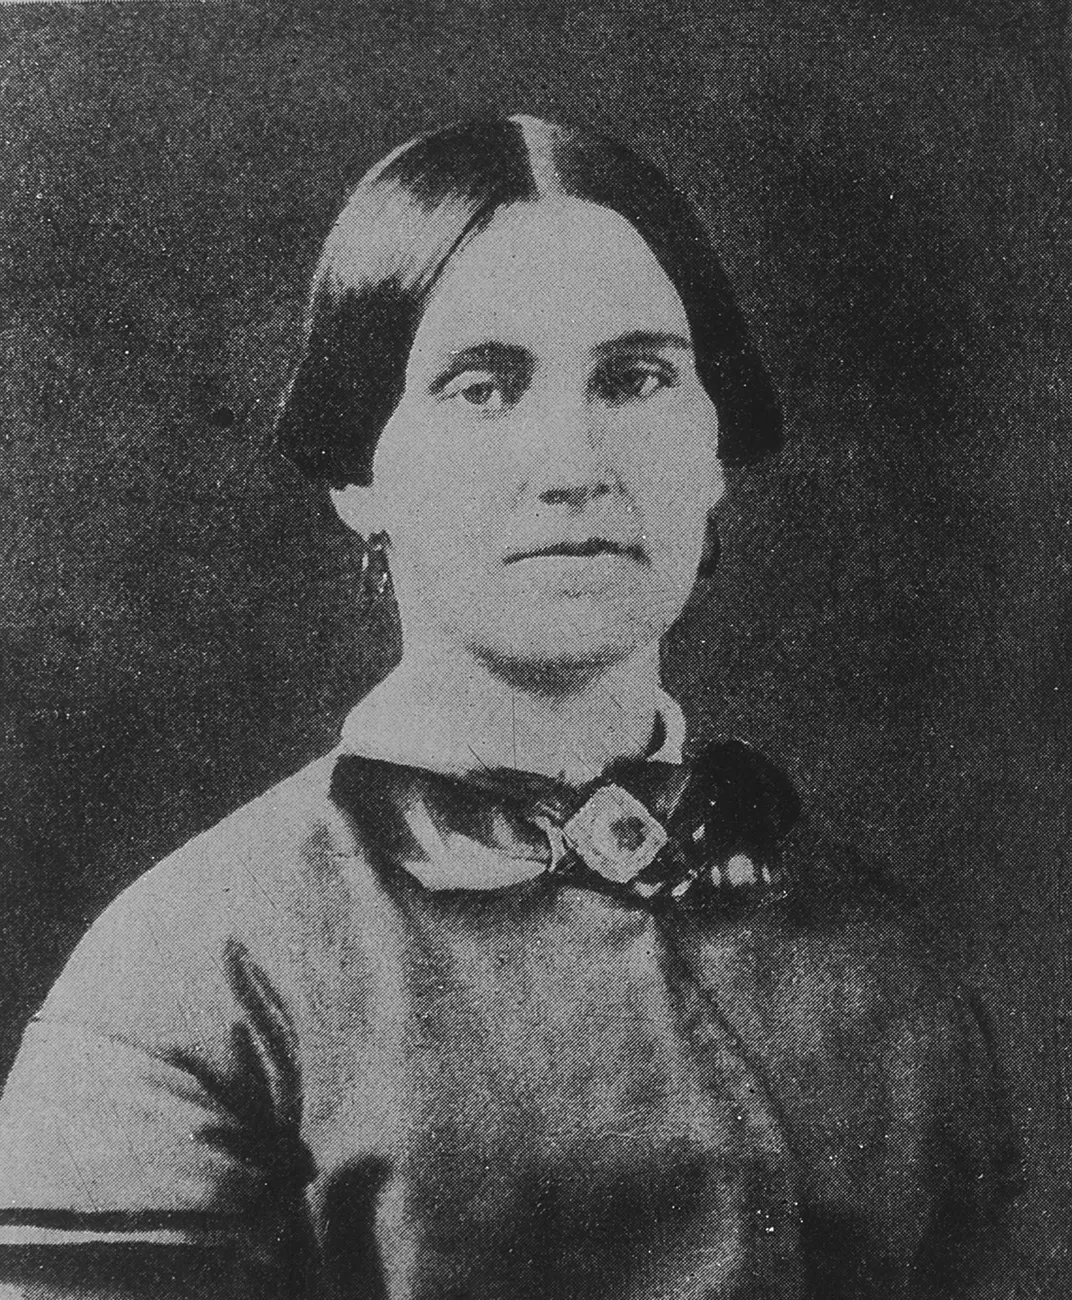 Mary Surratt, the first woman executed by the U.S. government